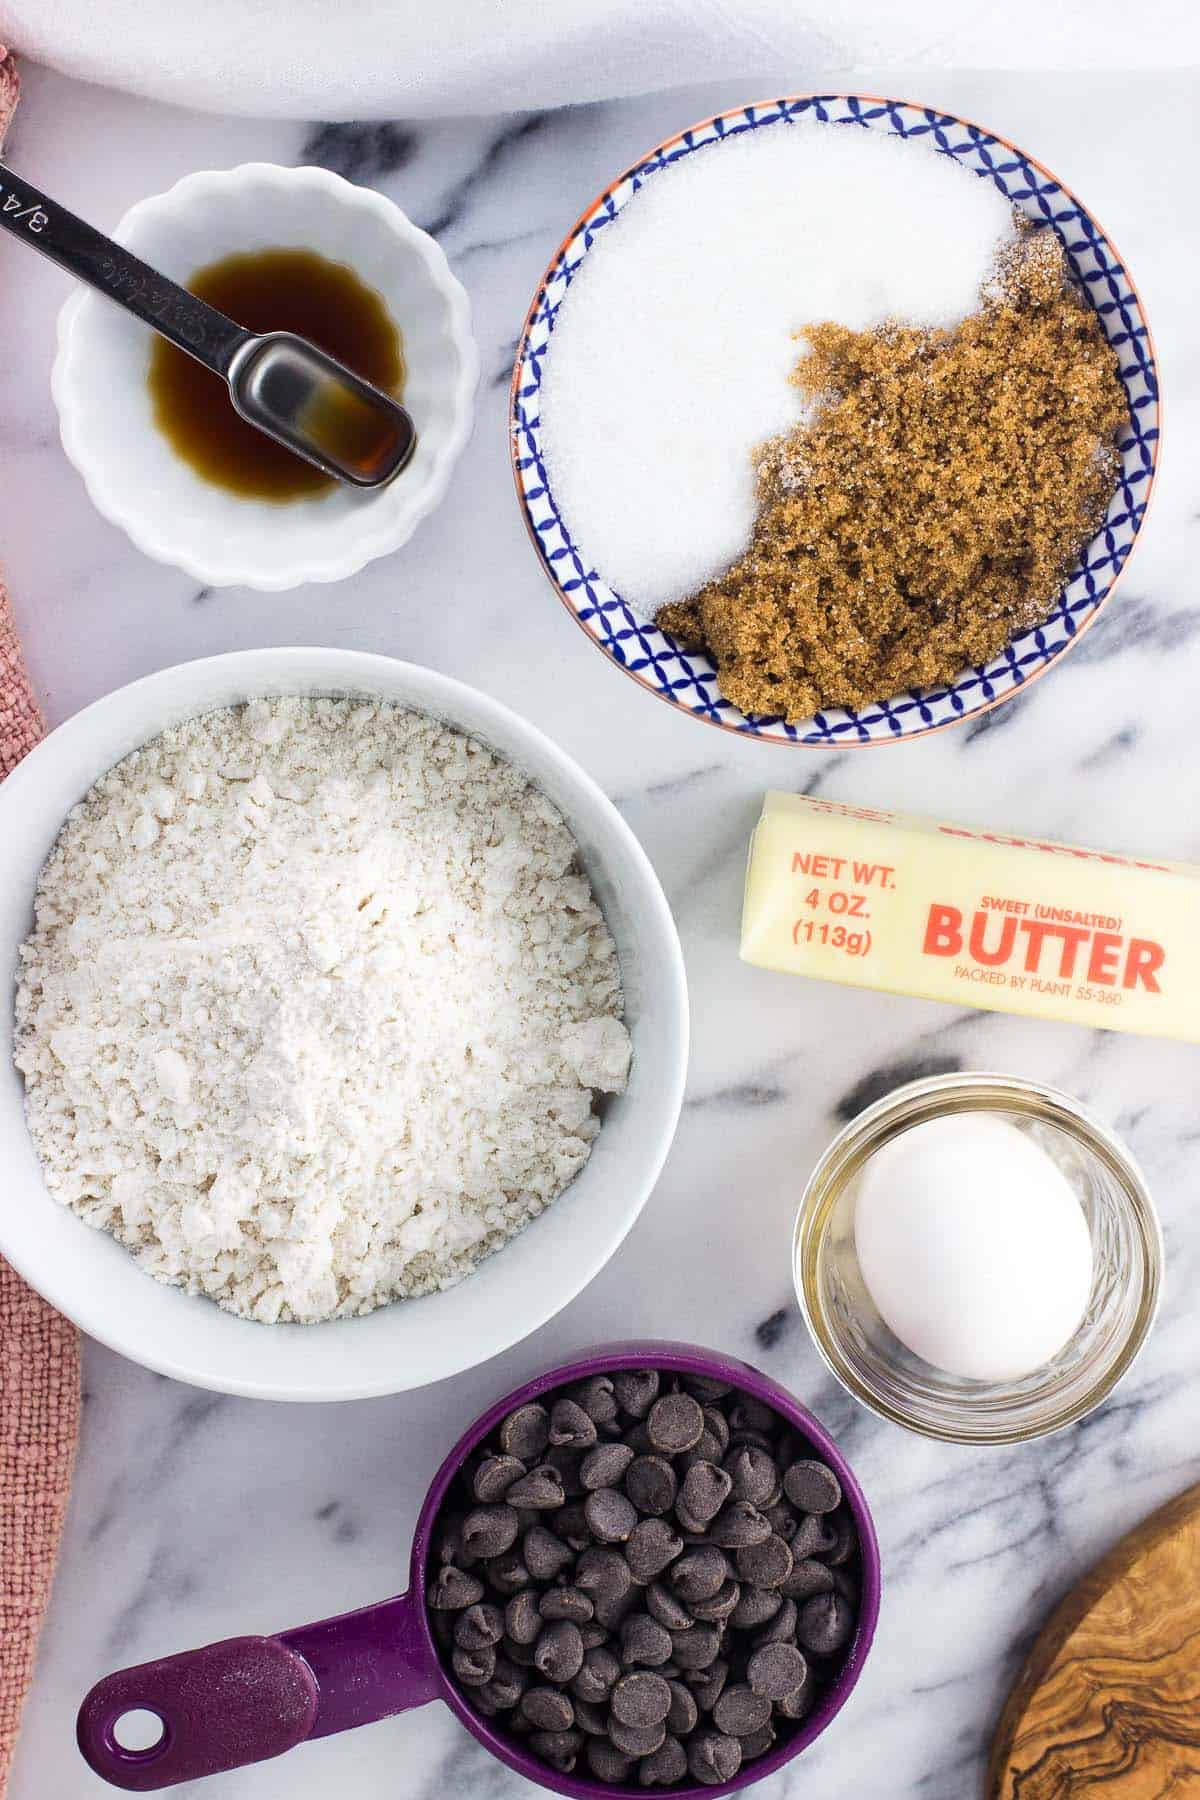 The recipe ingredients in separate bowls and cups on a marble board.